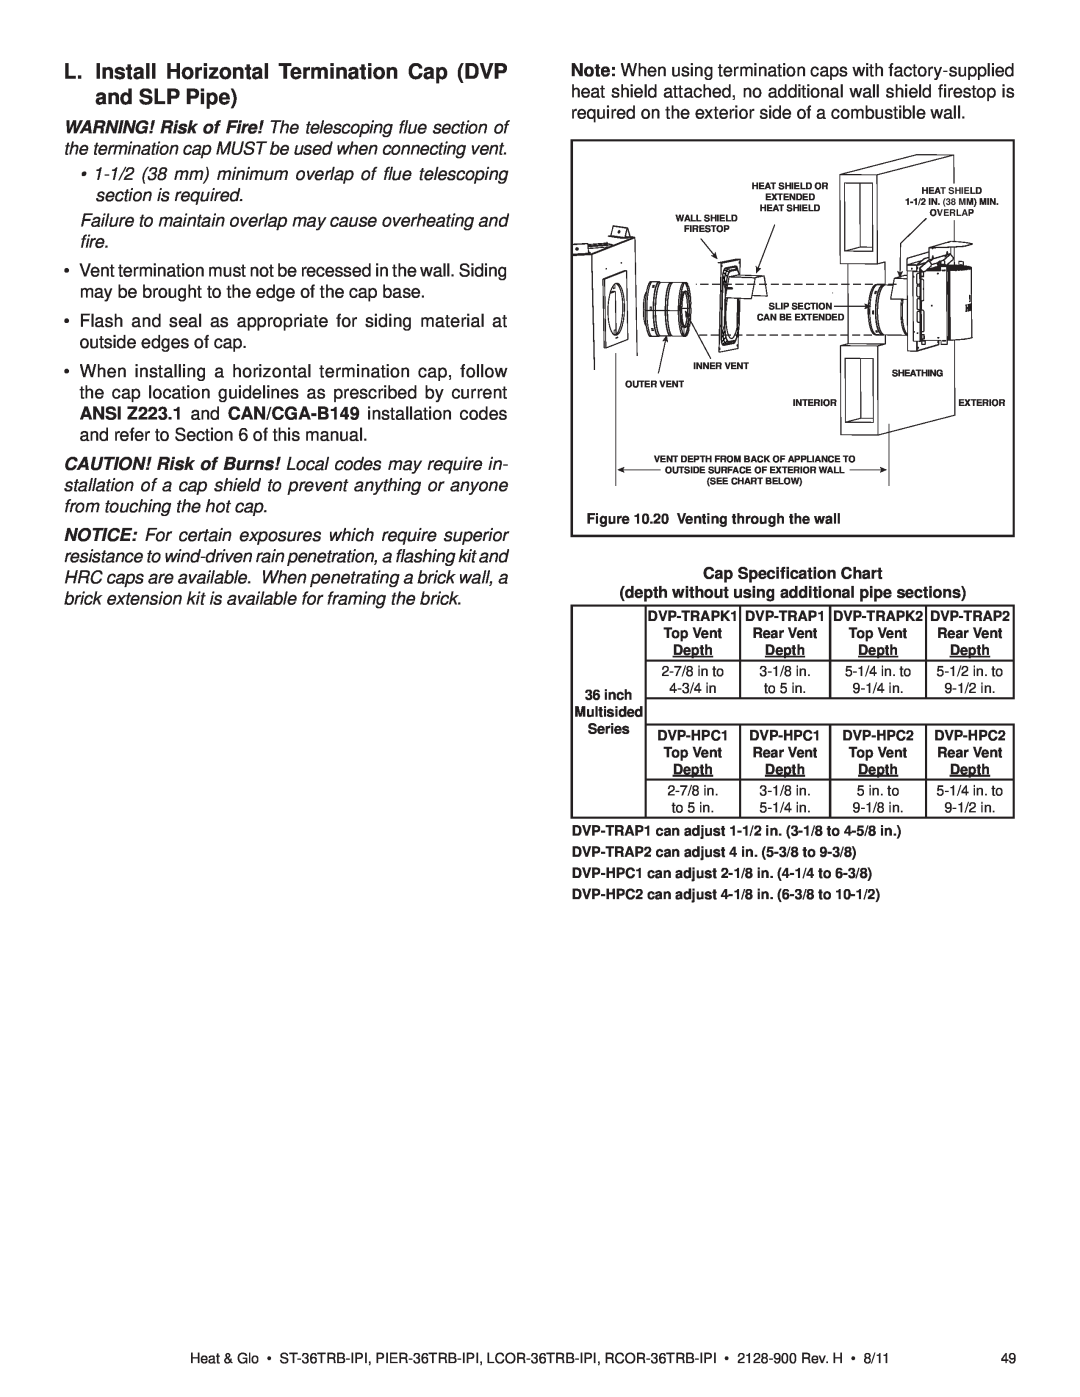 Heat & Glo LifeStyle ST-36TRB-IPI owner manual Cap Speciﬁcation Chart, depth without using additional pipe sections 